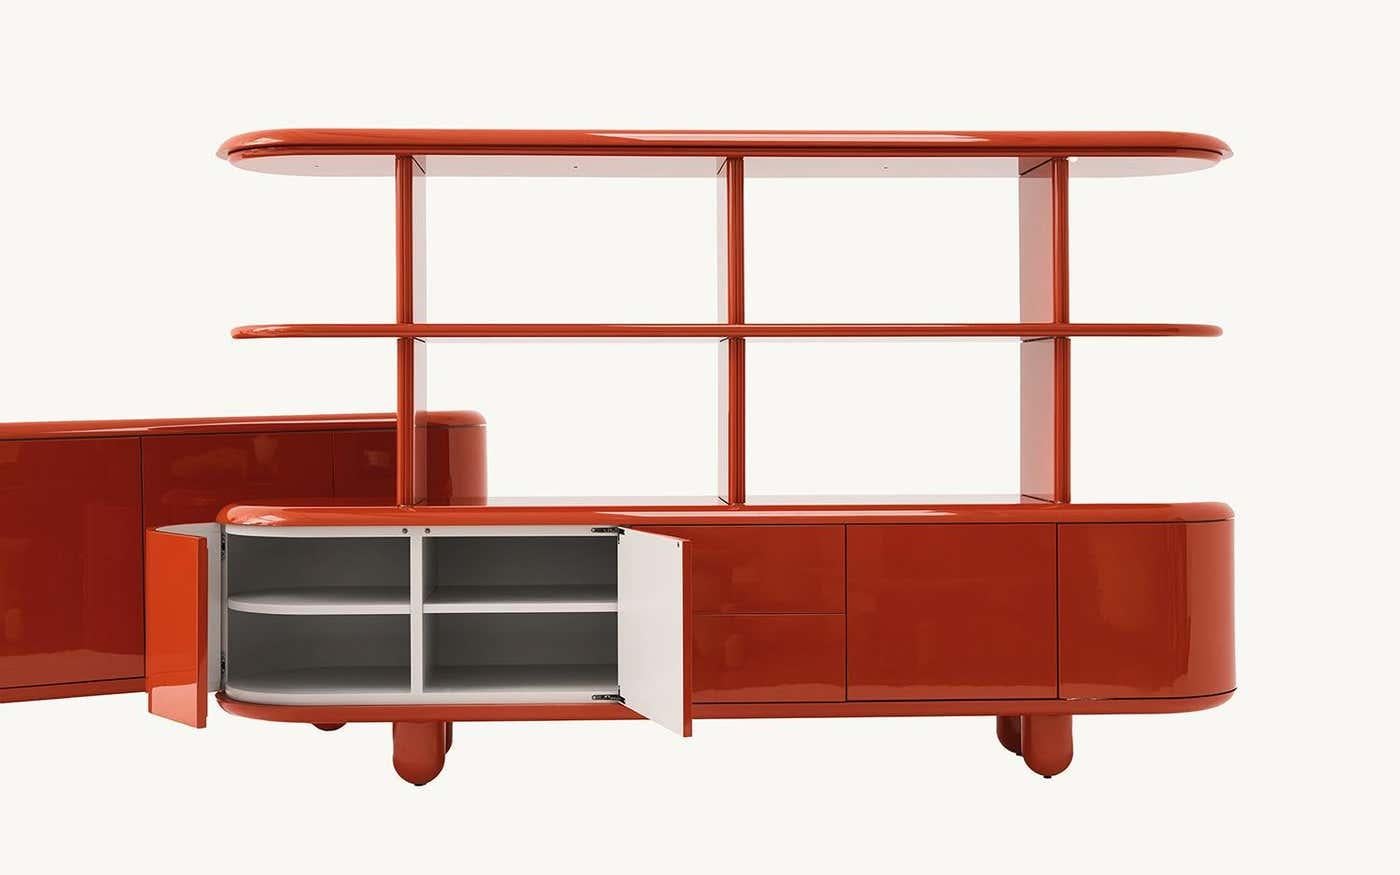 Modern Red & White Wood Sideboard 4 Doors + Drawers by Jaime Hayon

Manufactured in Spain.

Materials and finishes: External finish and matte lacquered interior finish. Legs made from solid alder wood, gloss lacquer finish. Horizontal shelving and